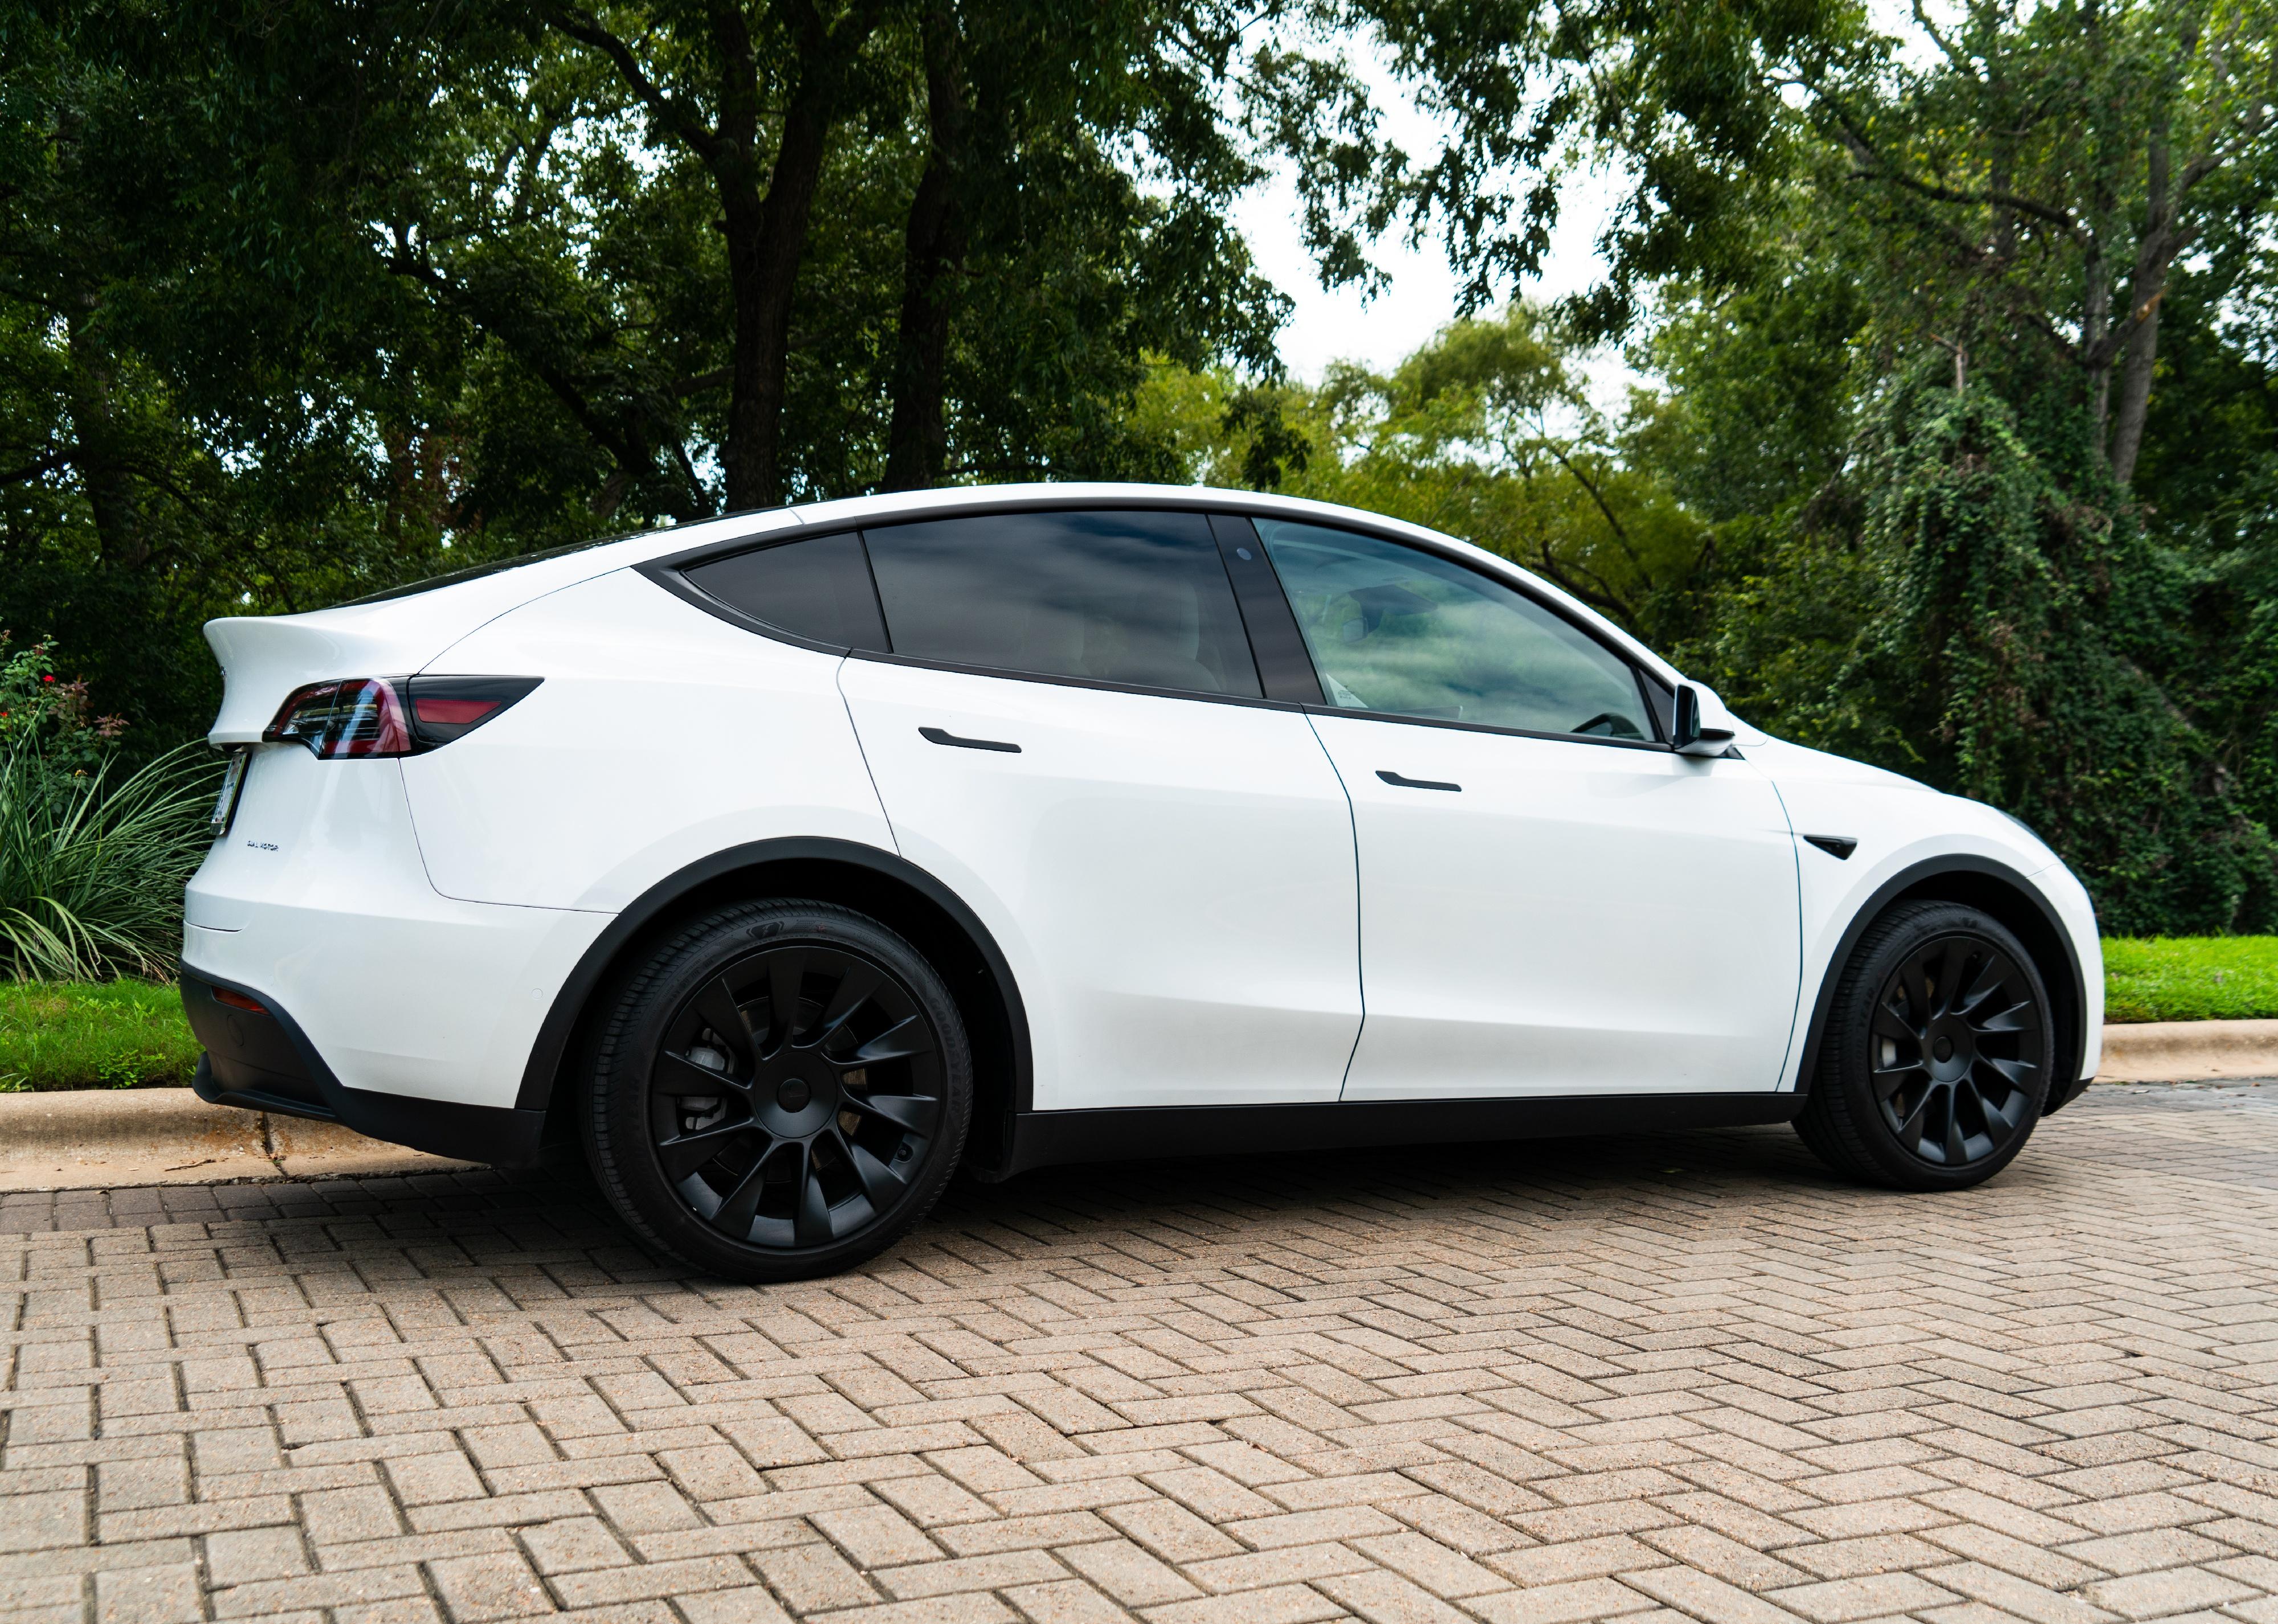 Tesla model Y with white paint and blue wheels.